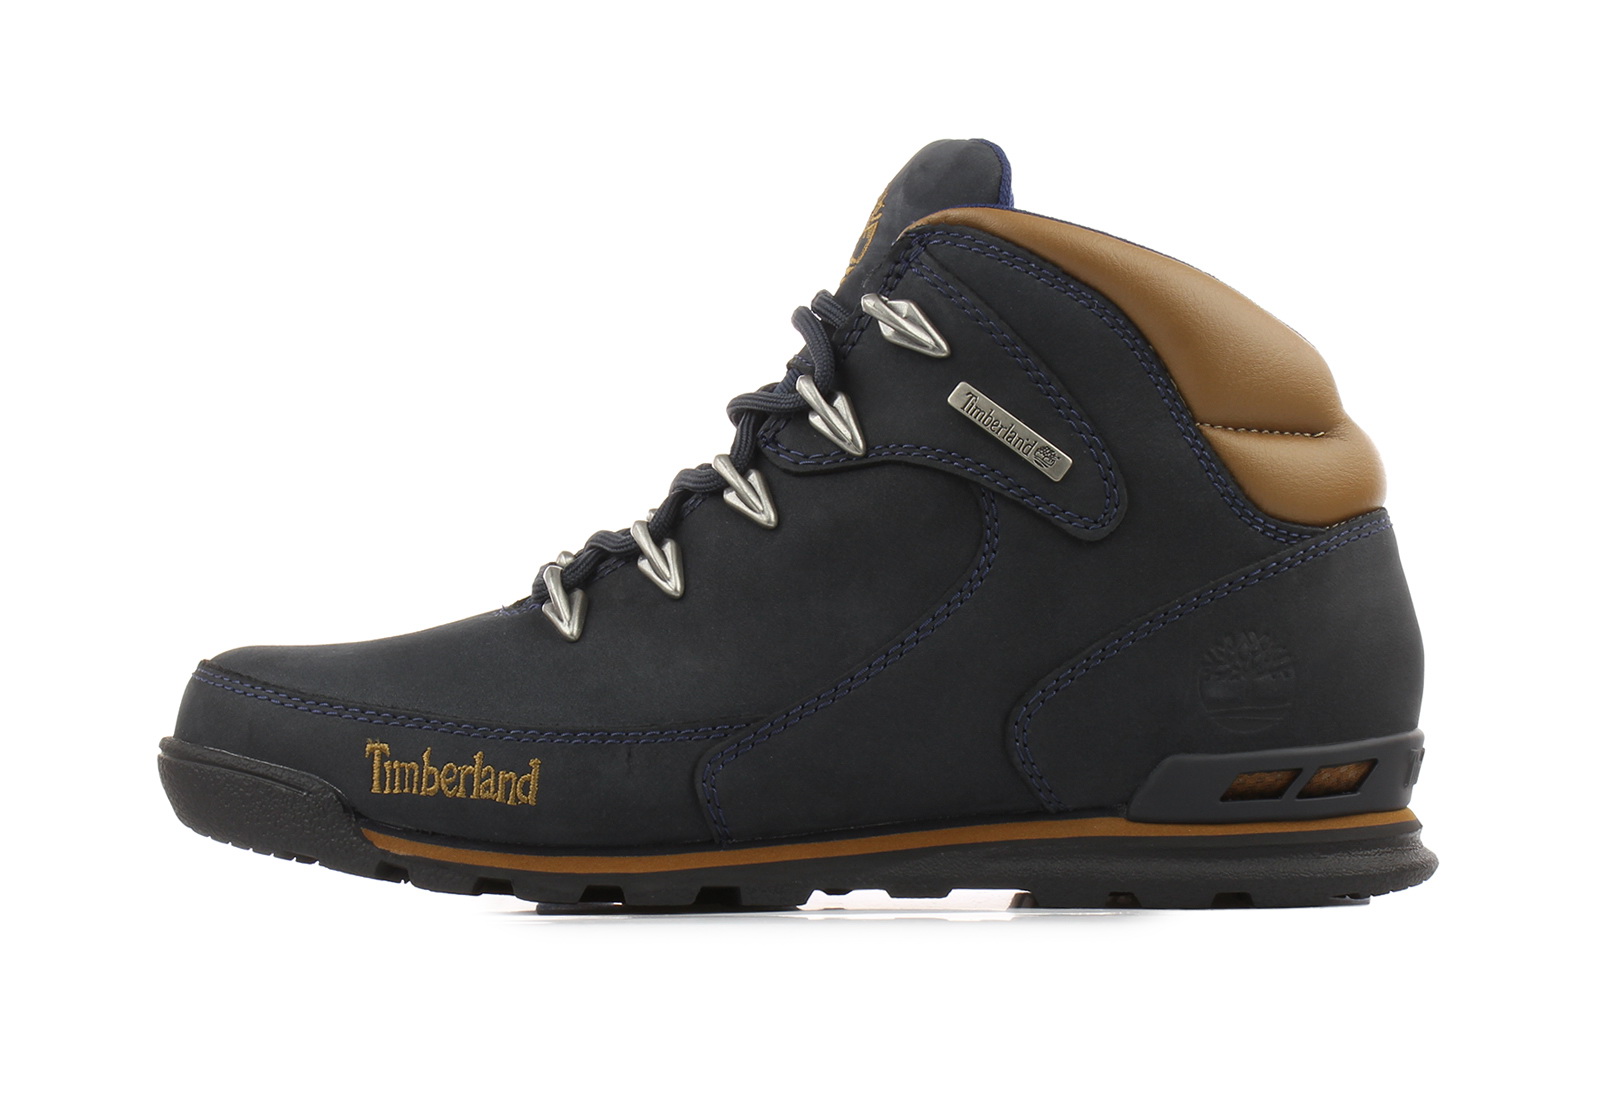 Timberland Hikers - Euro Rock - 6165R-NVY - Online shop for sneakers ...